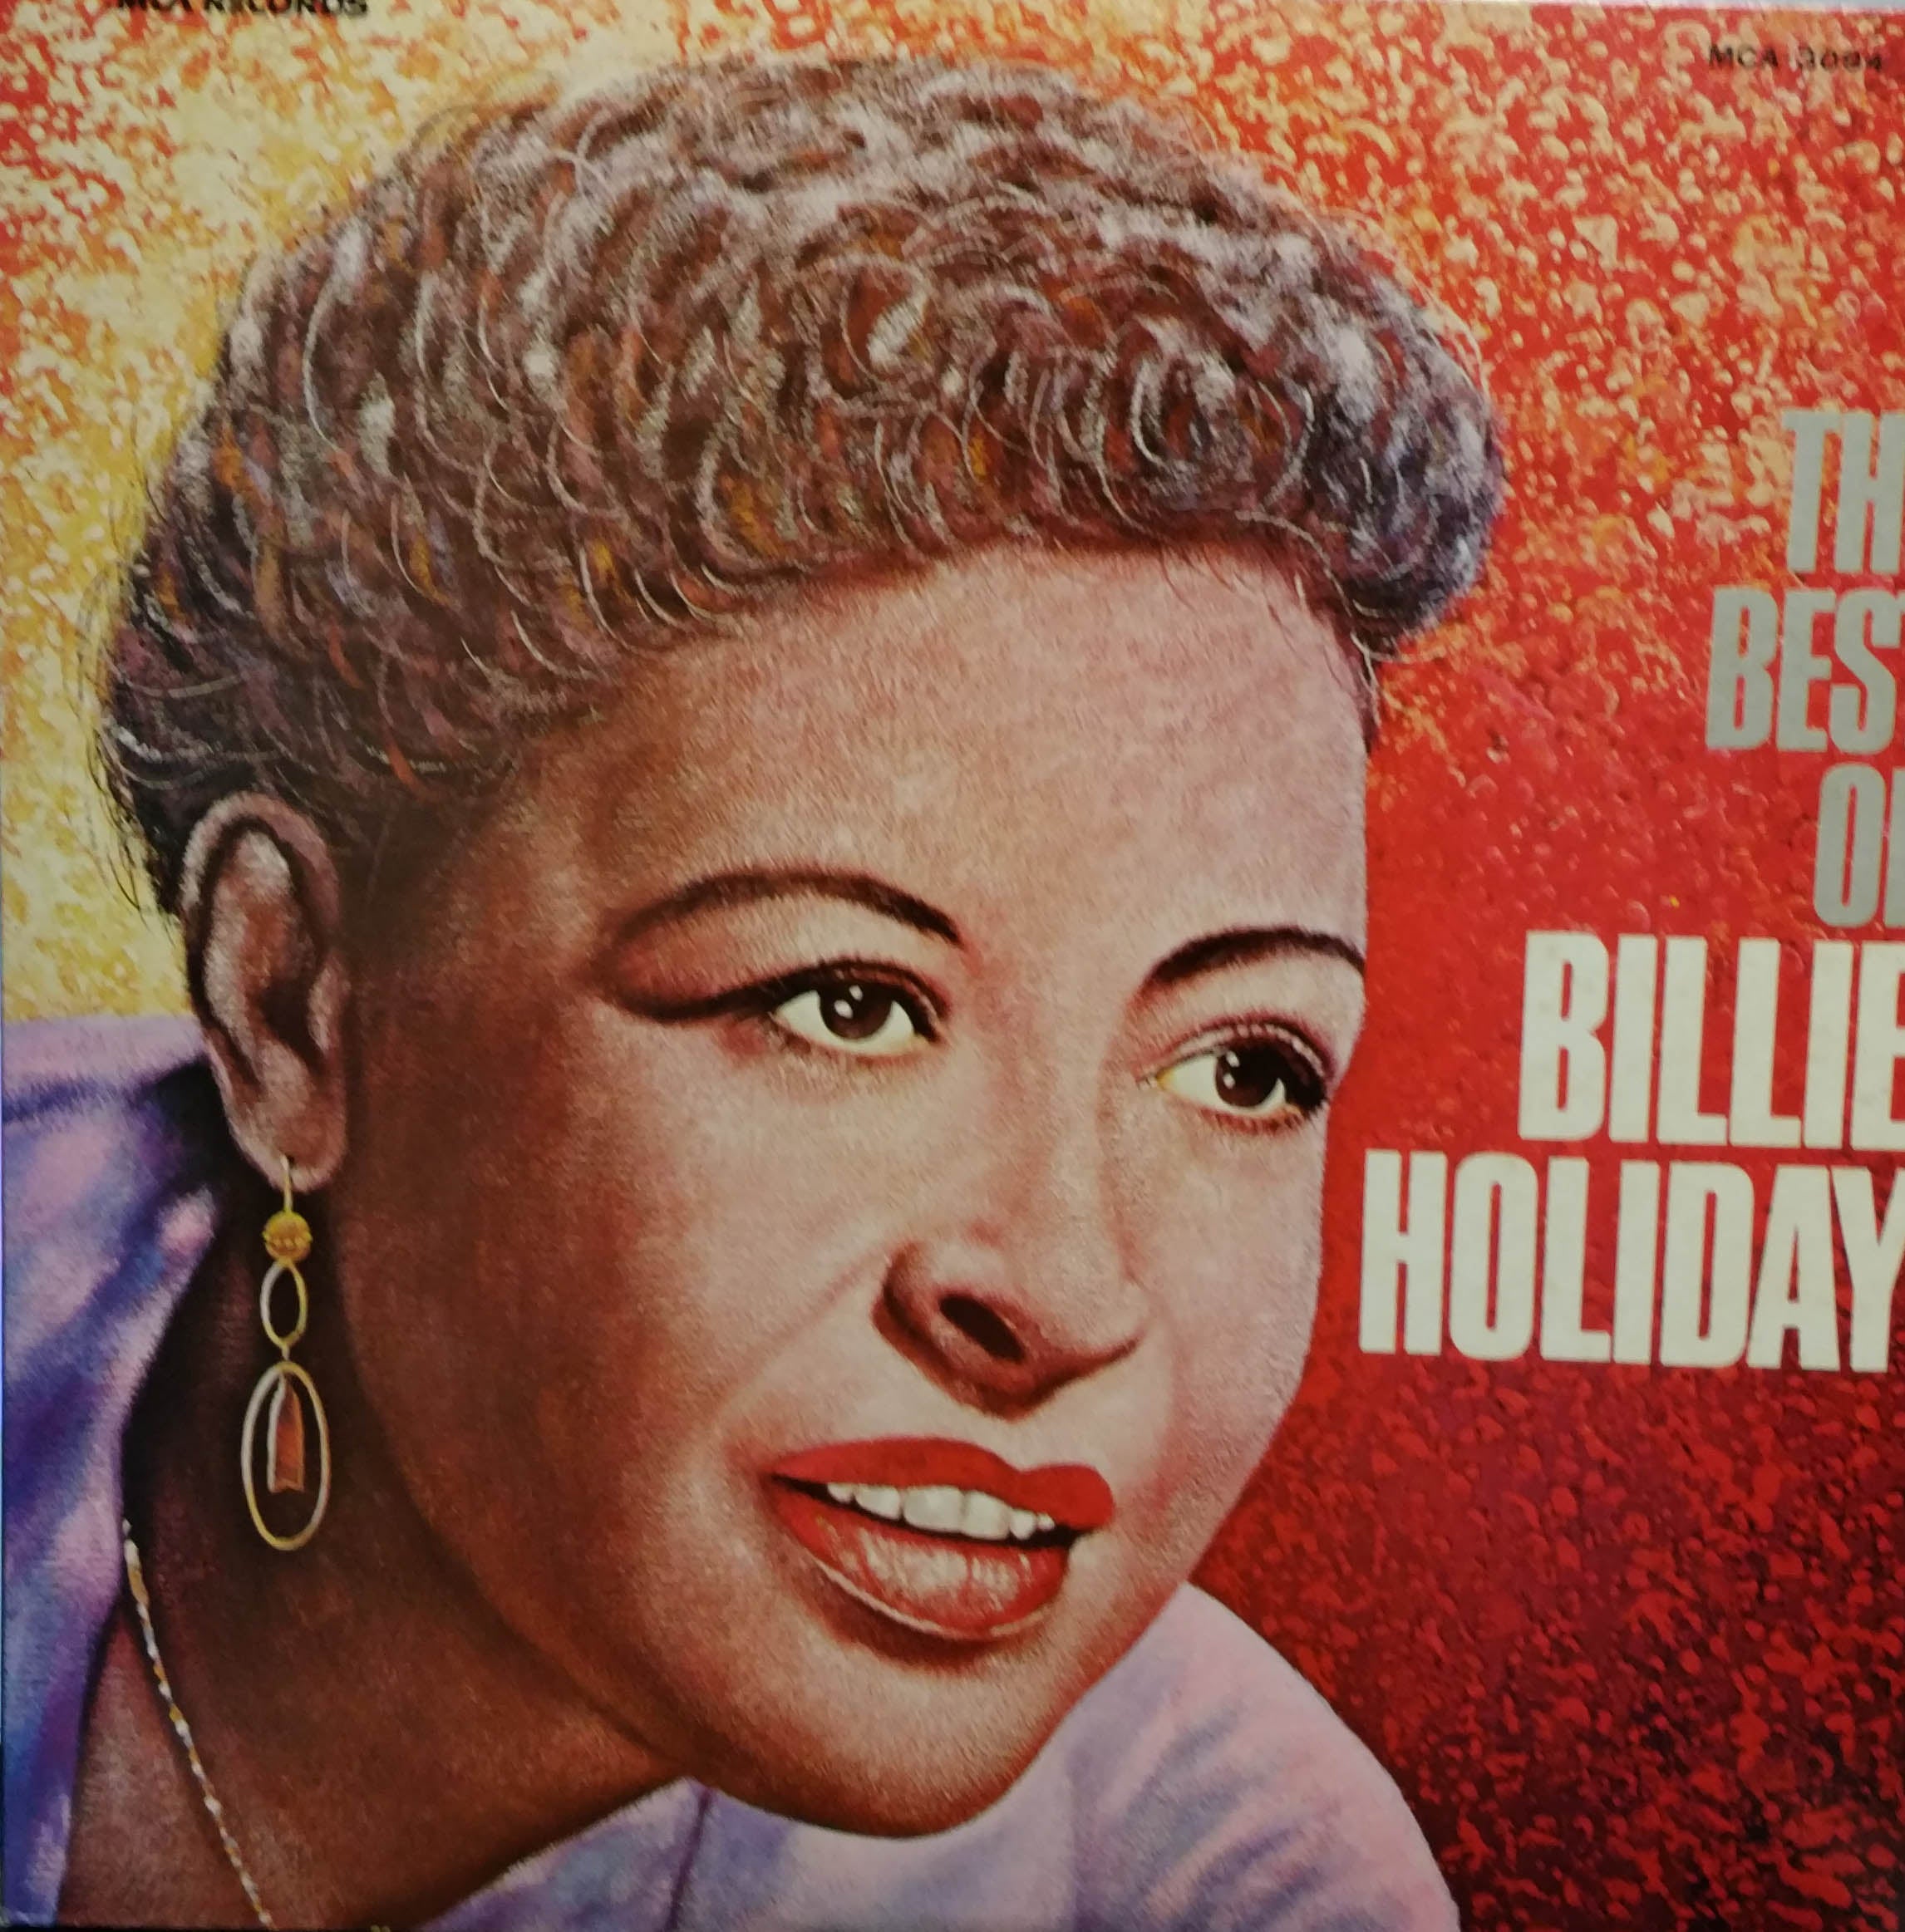 BILLIE HOLIDAY / THE BEST OF BILLIE HOLIDAY – TICRO MARKET